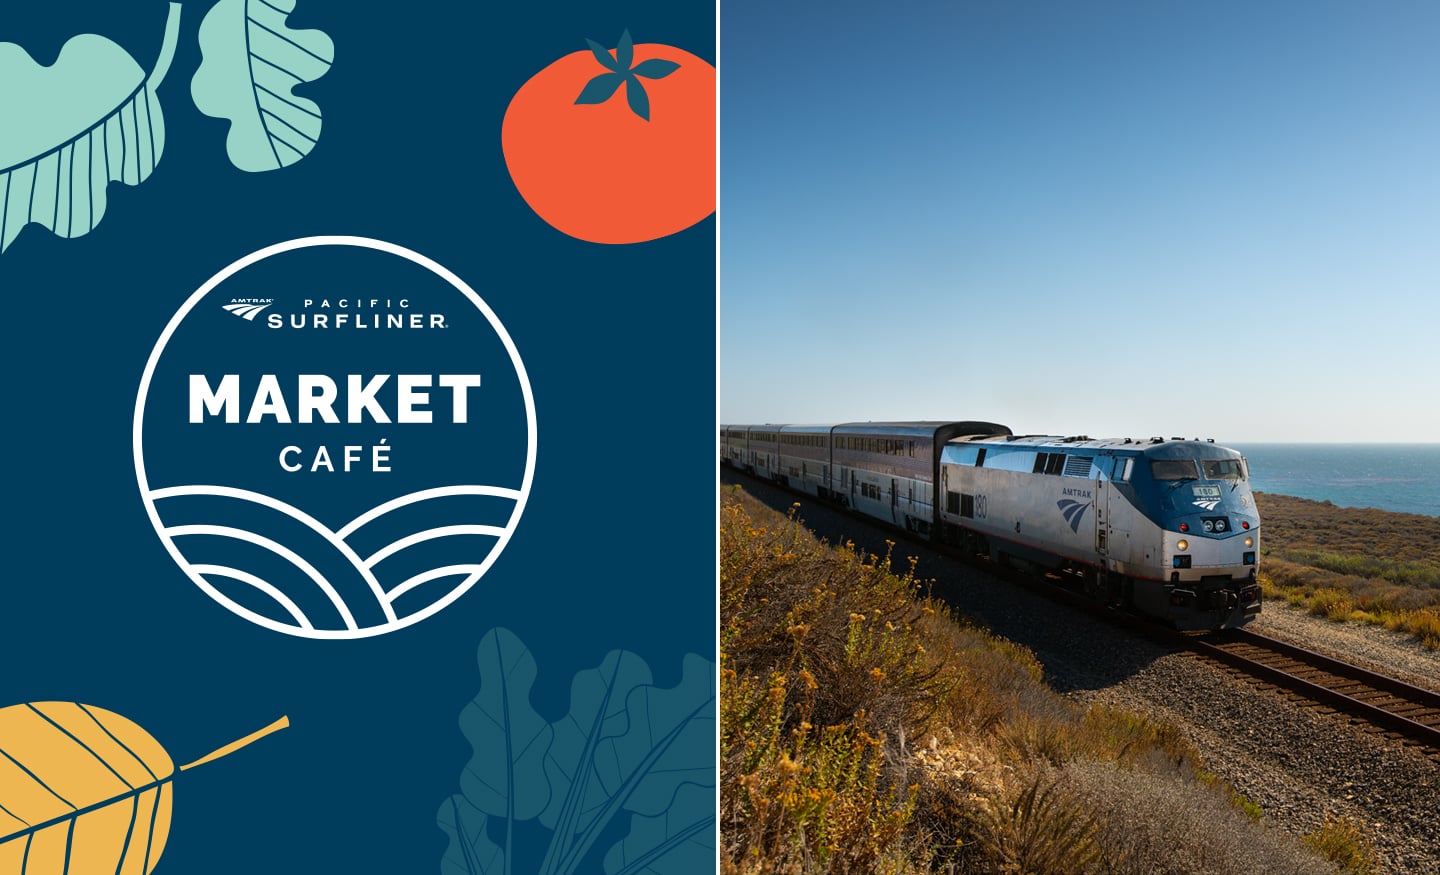 Pacific Surfliner train and Market Cafe logo new brand